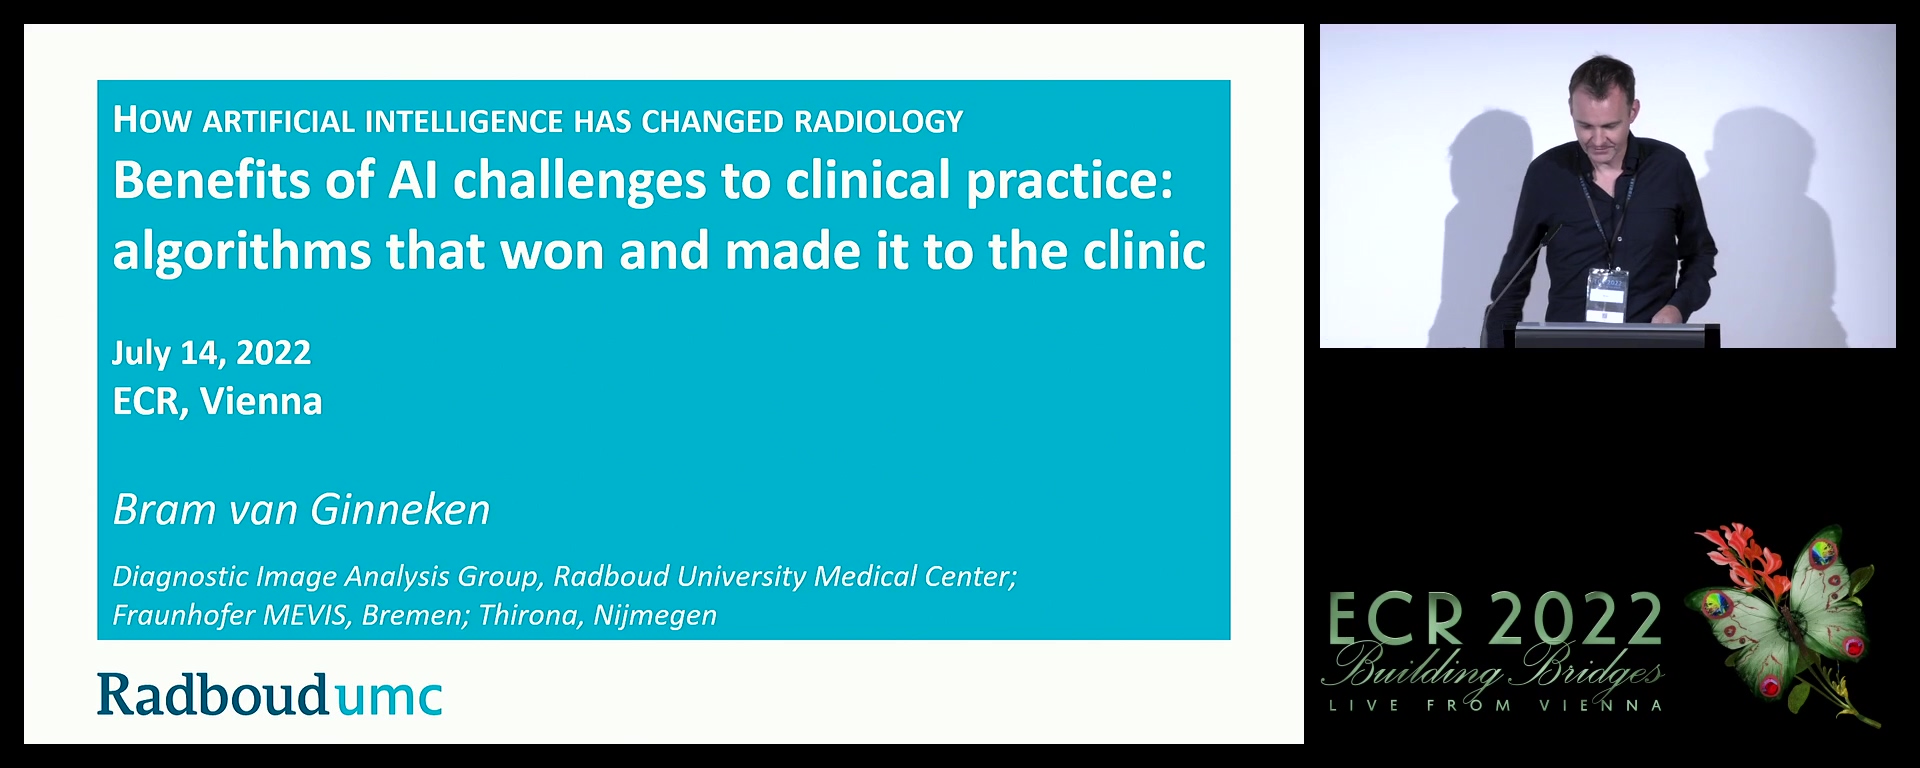 Benefits of AI challenges to clinical practice: algorithms that won and made it to the clinic